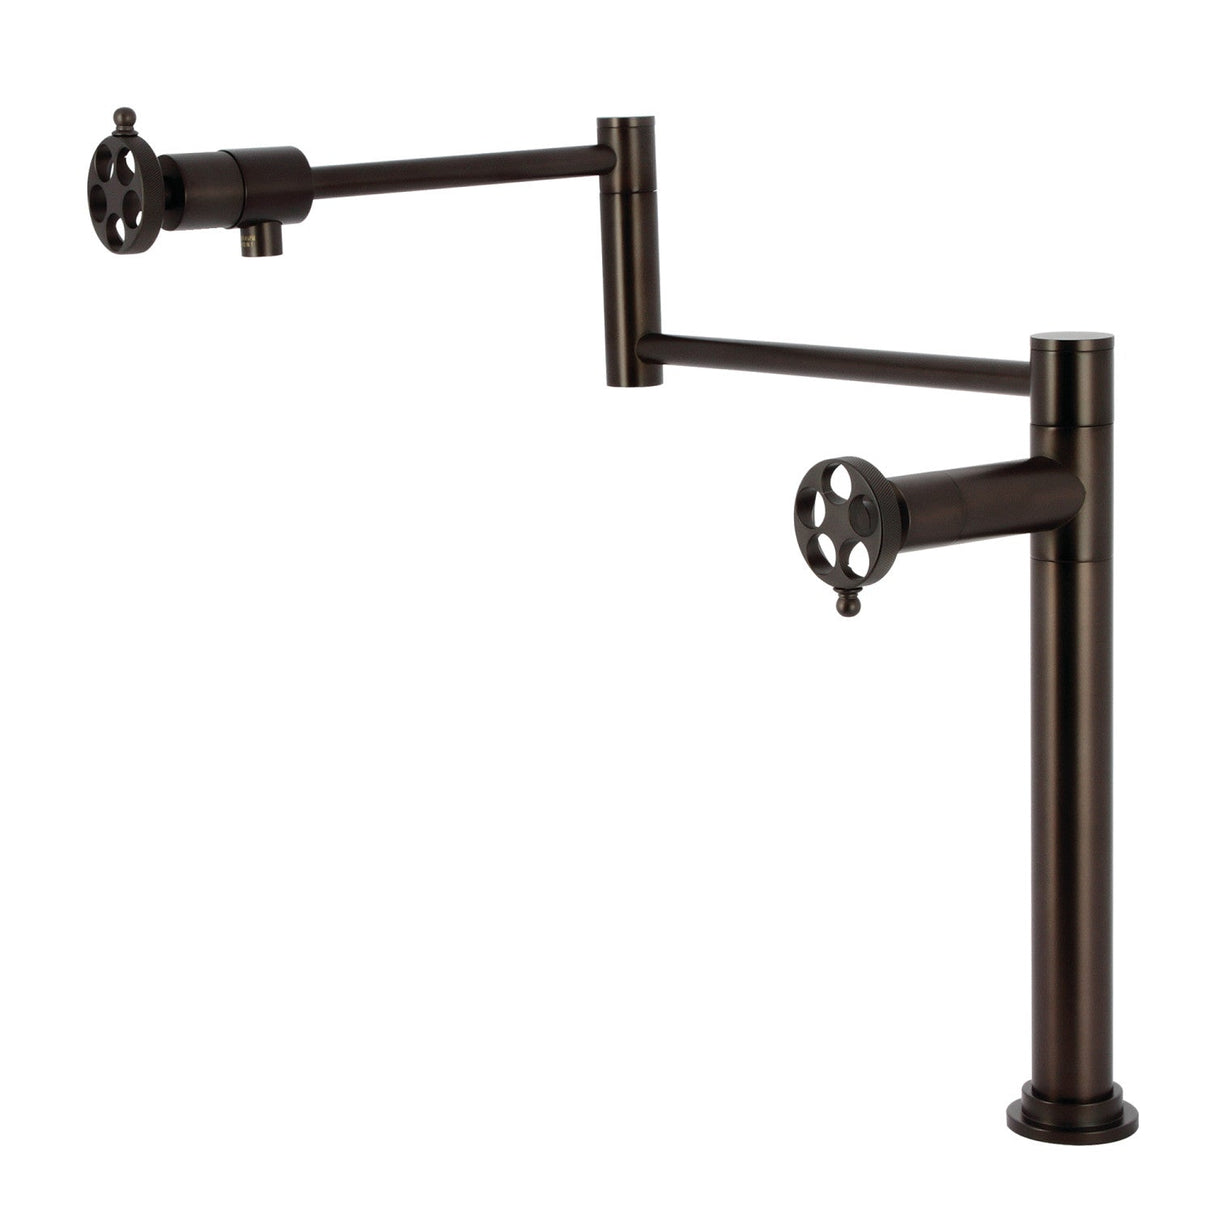 Wendell KS4705RKZ Two-Handle 1-Hole Deck Mount Pot Filler Faucet with Knurled Handle, Oil Rubbed Bronze